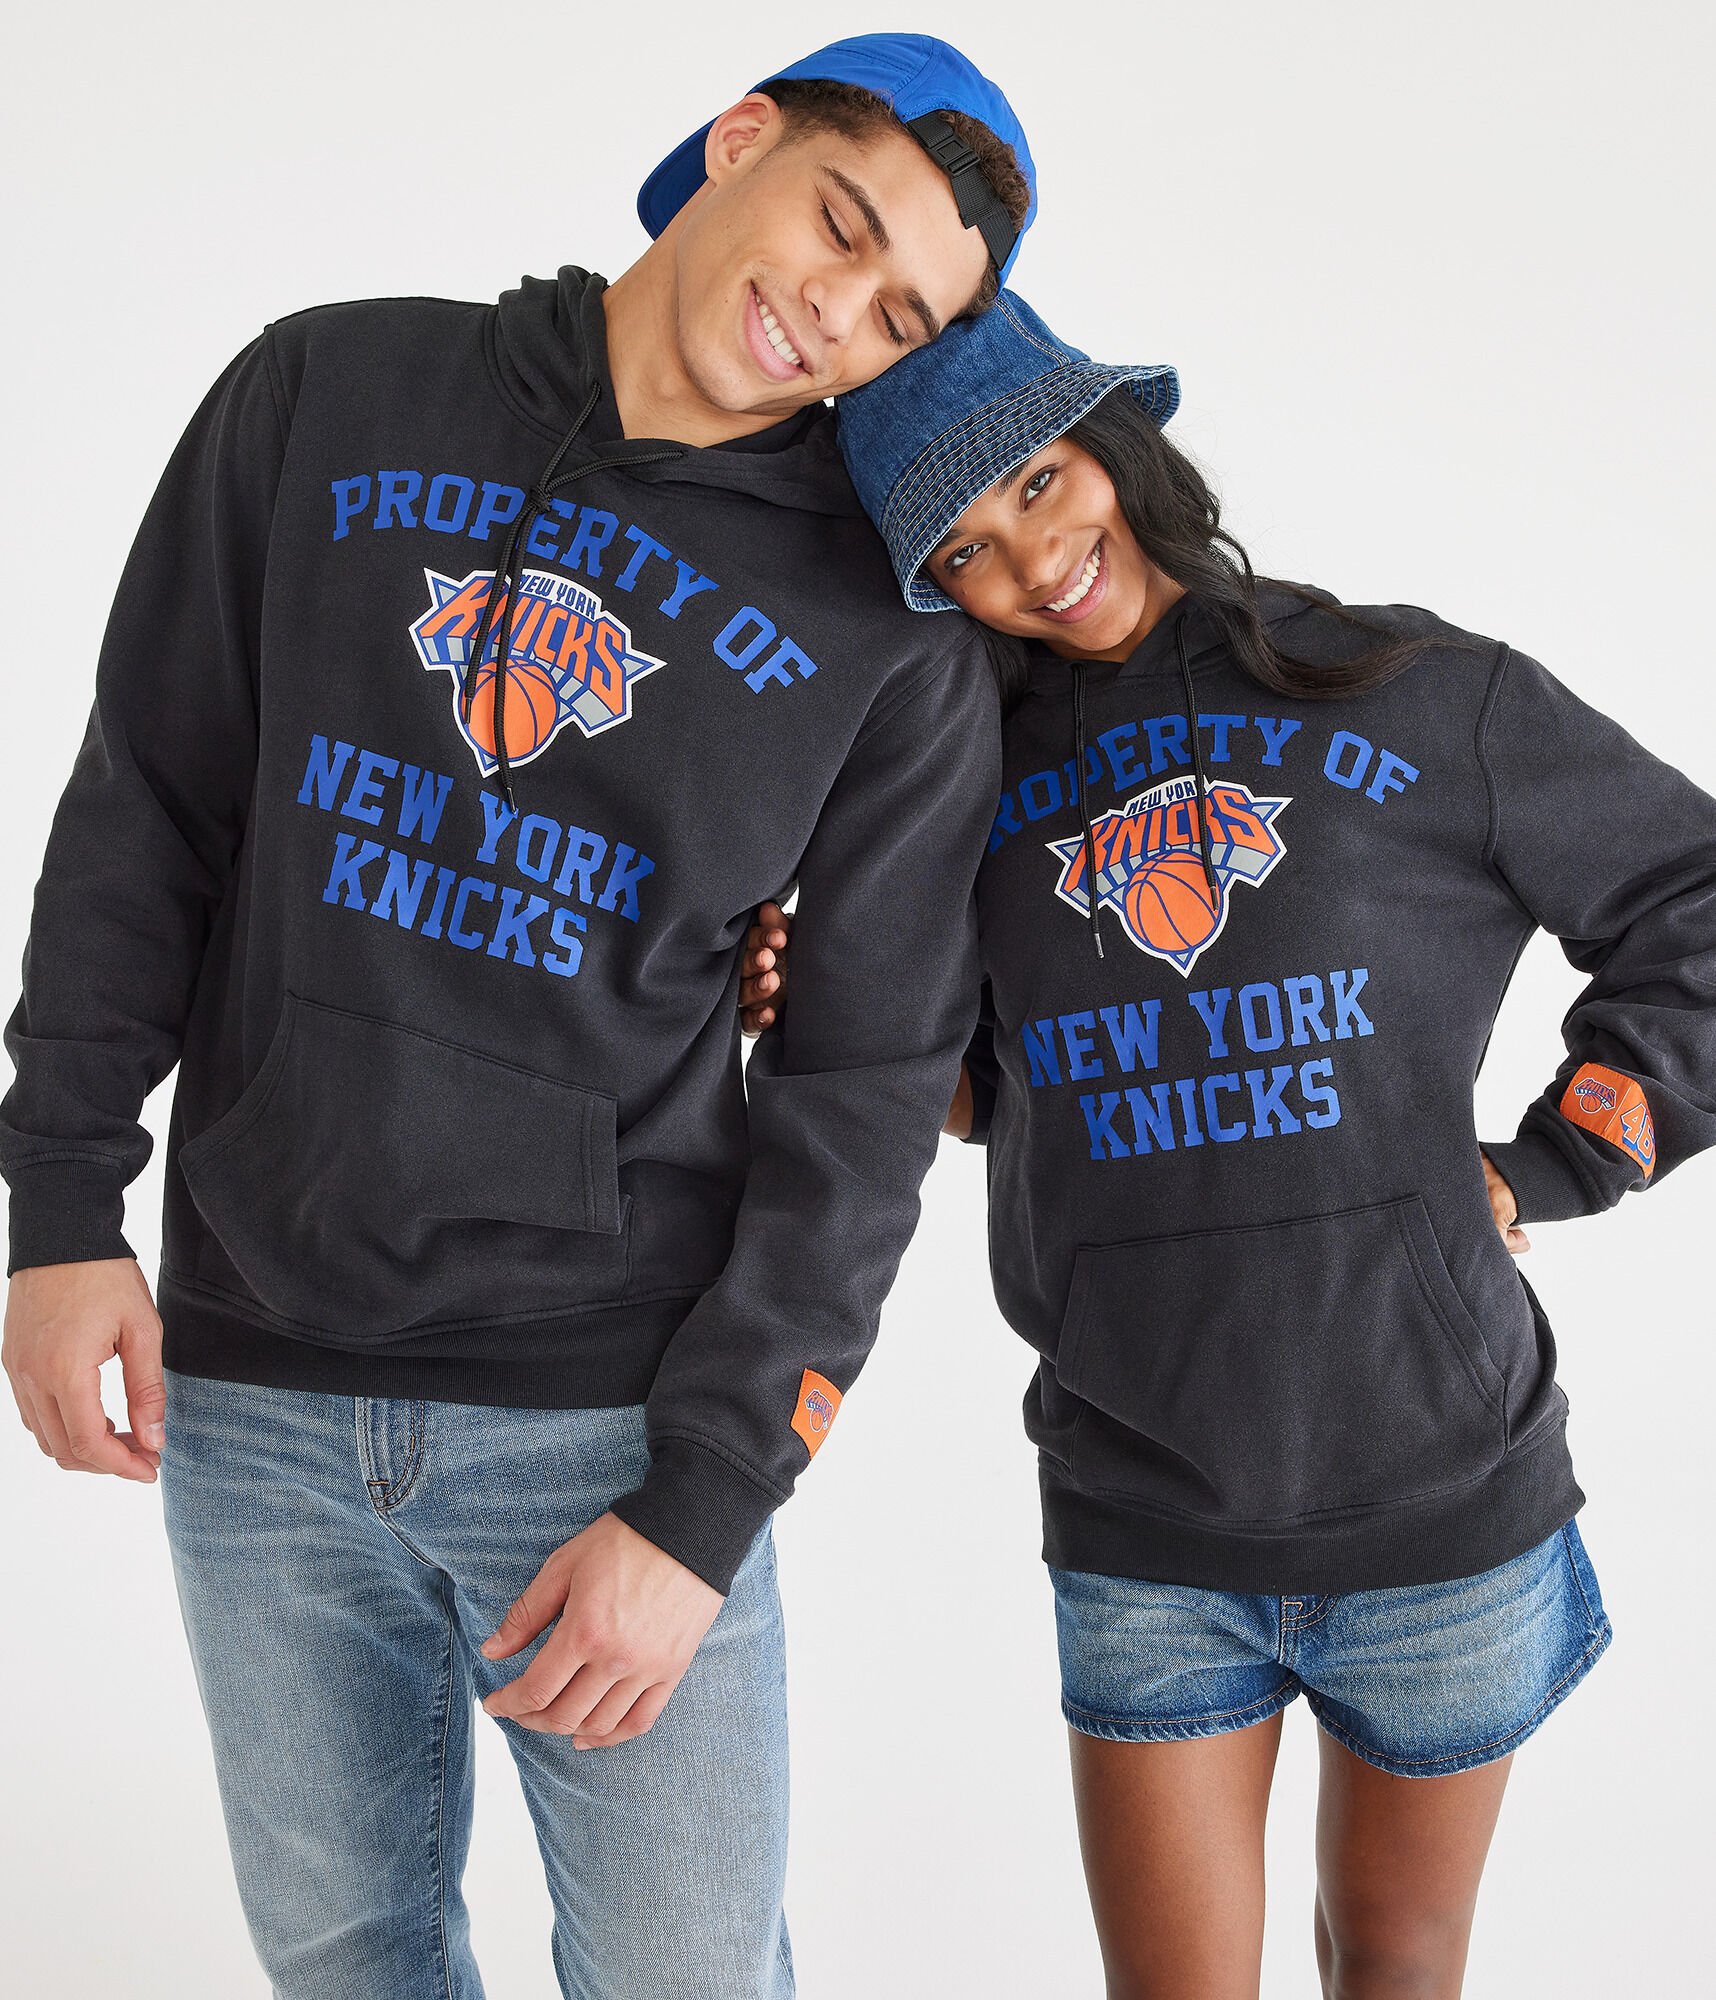 Property Of New York Knicks Pullover Hoodie